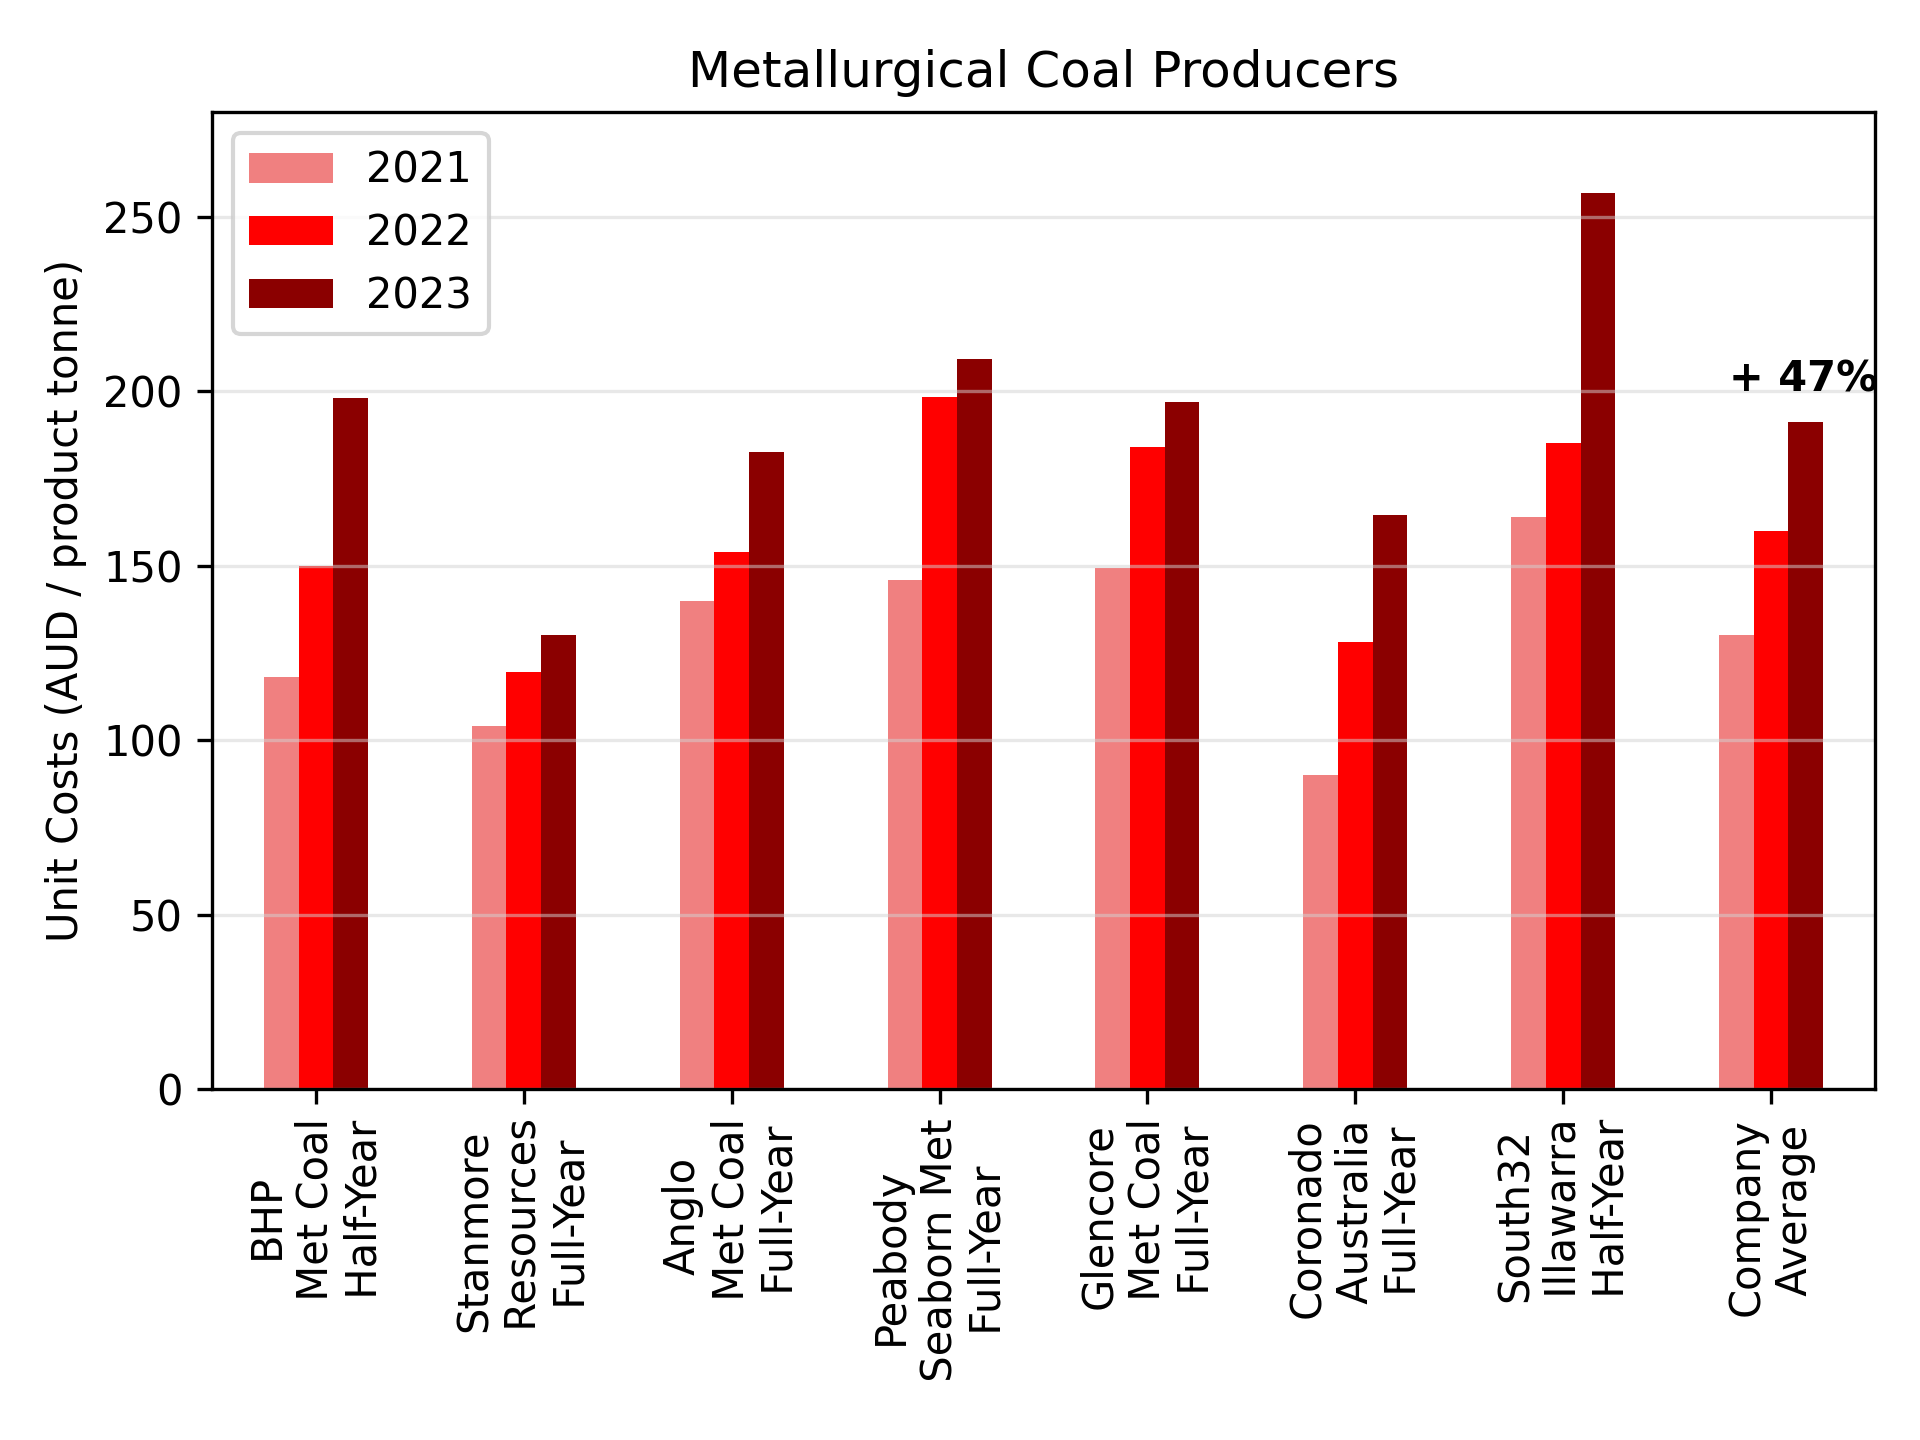 A chart showing Australian metallurgical coal producers’ reported unit costs 